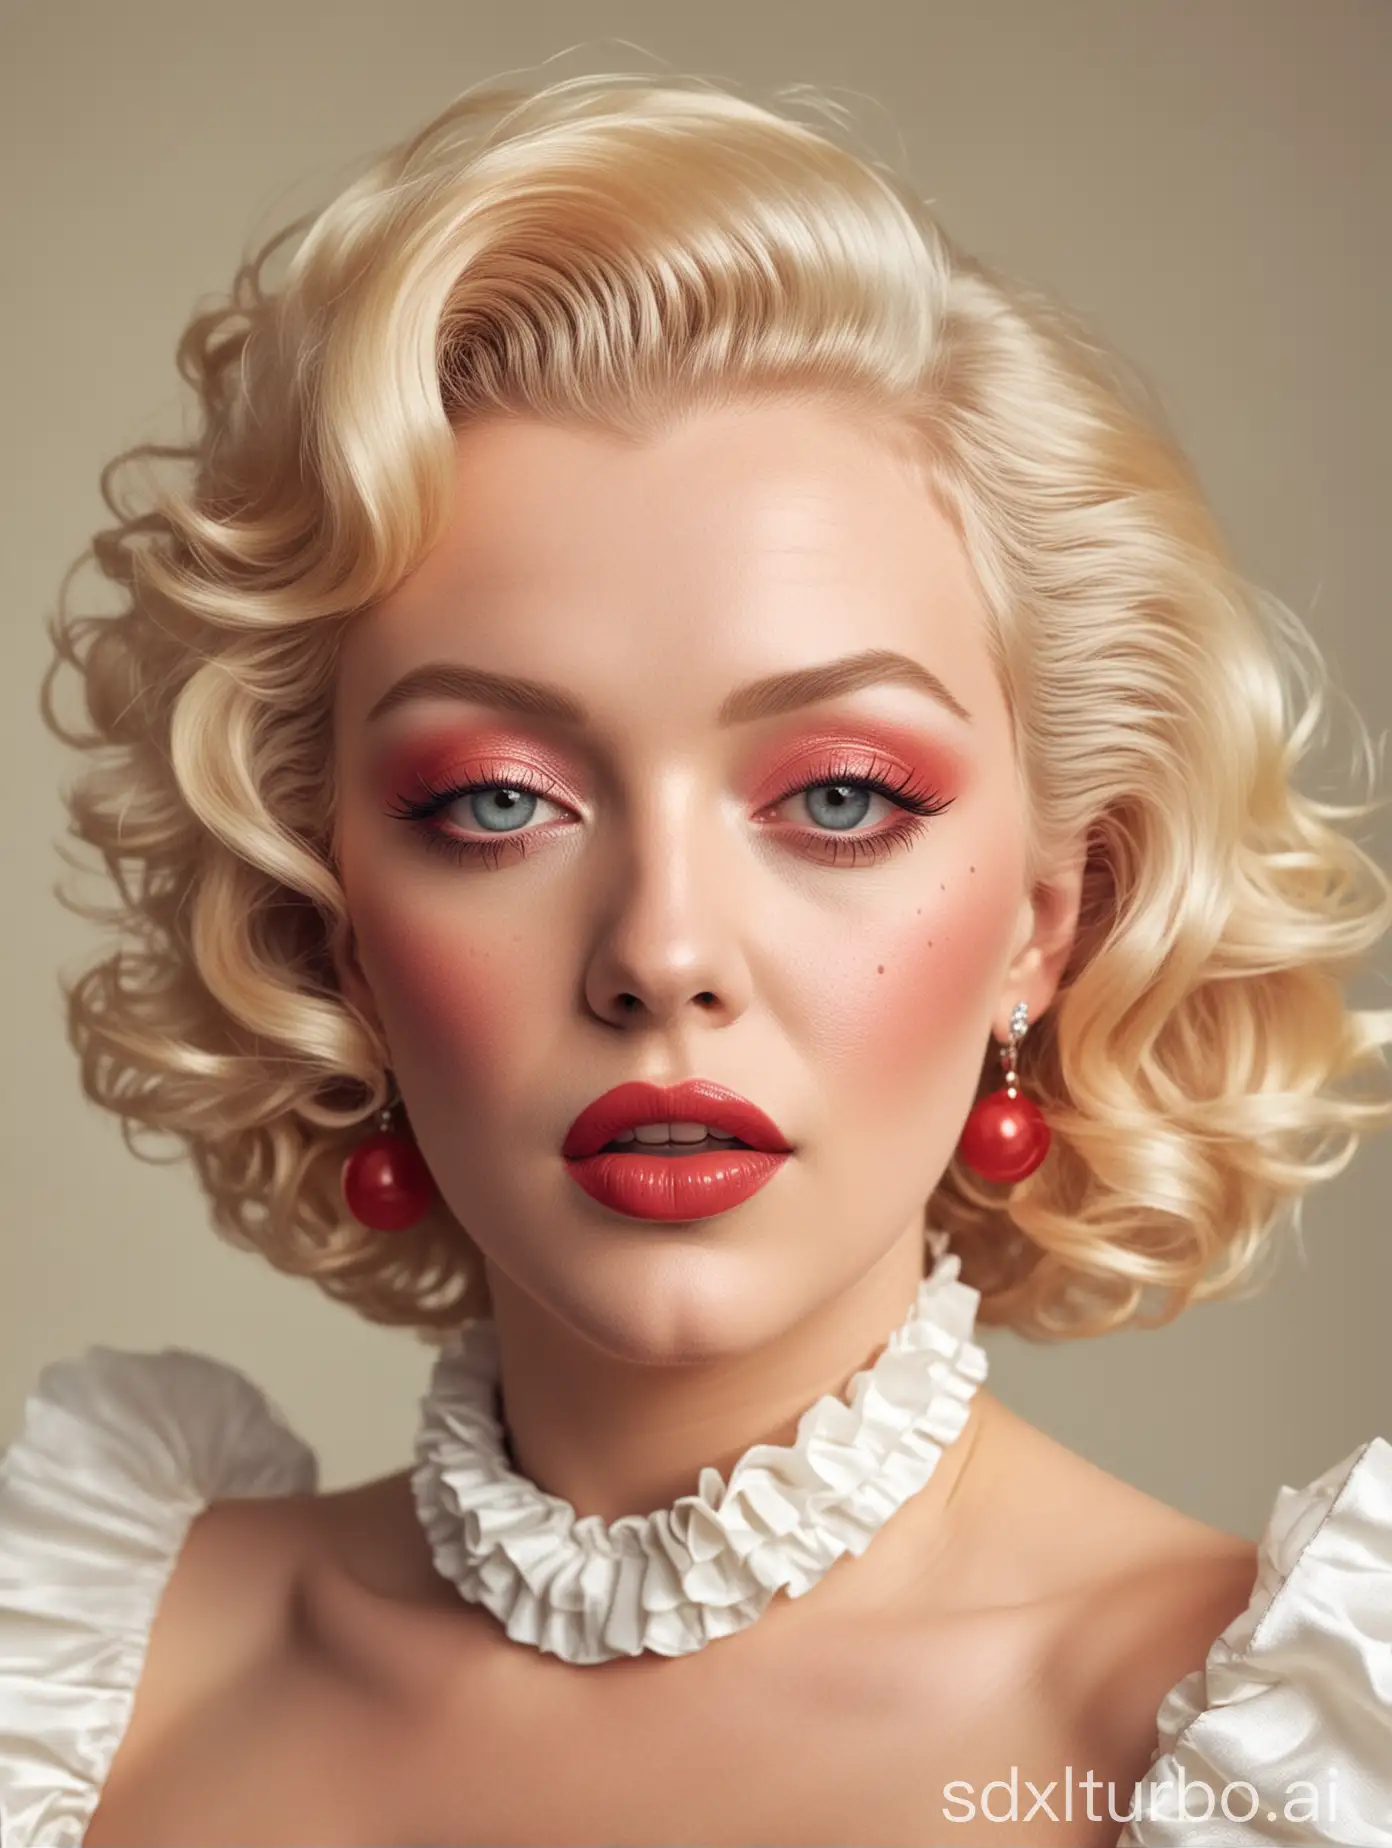 Marilyn Monroe，huge breast, ((full body))，coral pink blush under the eyes, "Midjourney" fashion design, couture clown, luxe, smooth dewy makeup, lipstick,, rouge, pale skin, silky curls, hair platinum blonde, Elizabethan collar, red and white